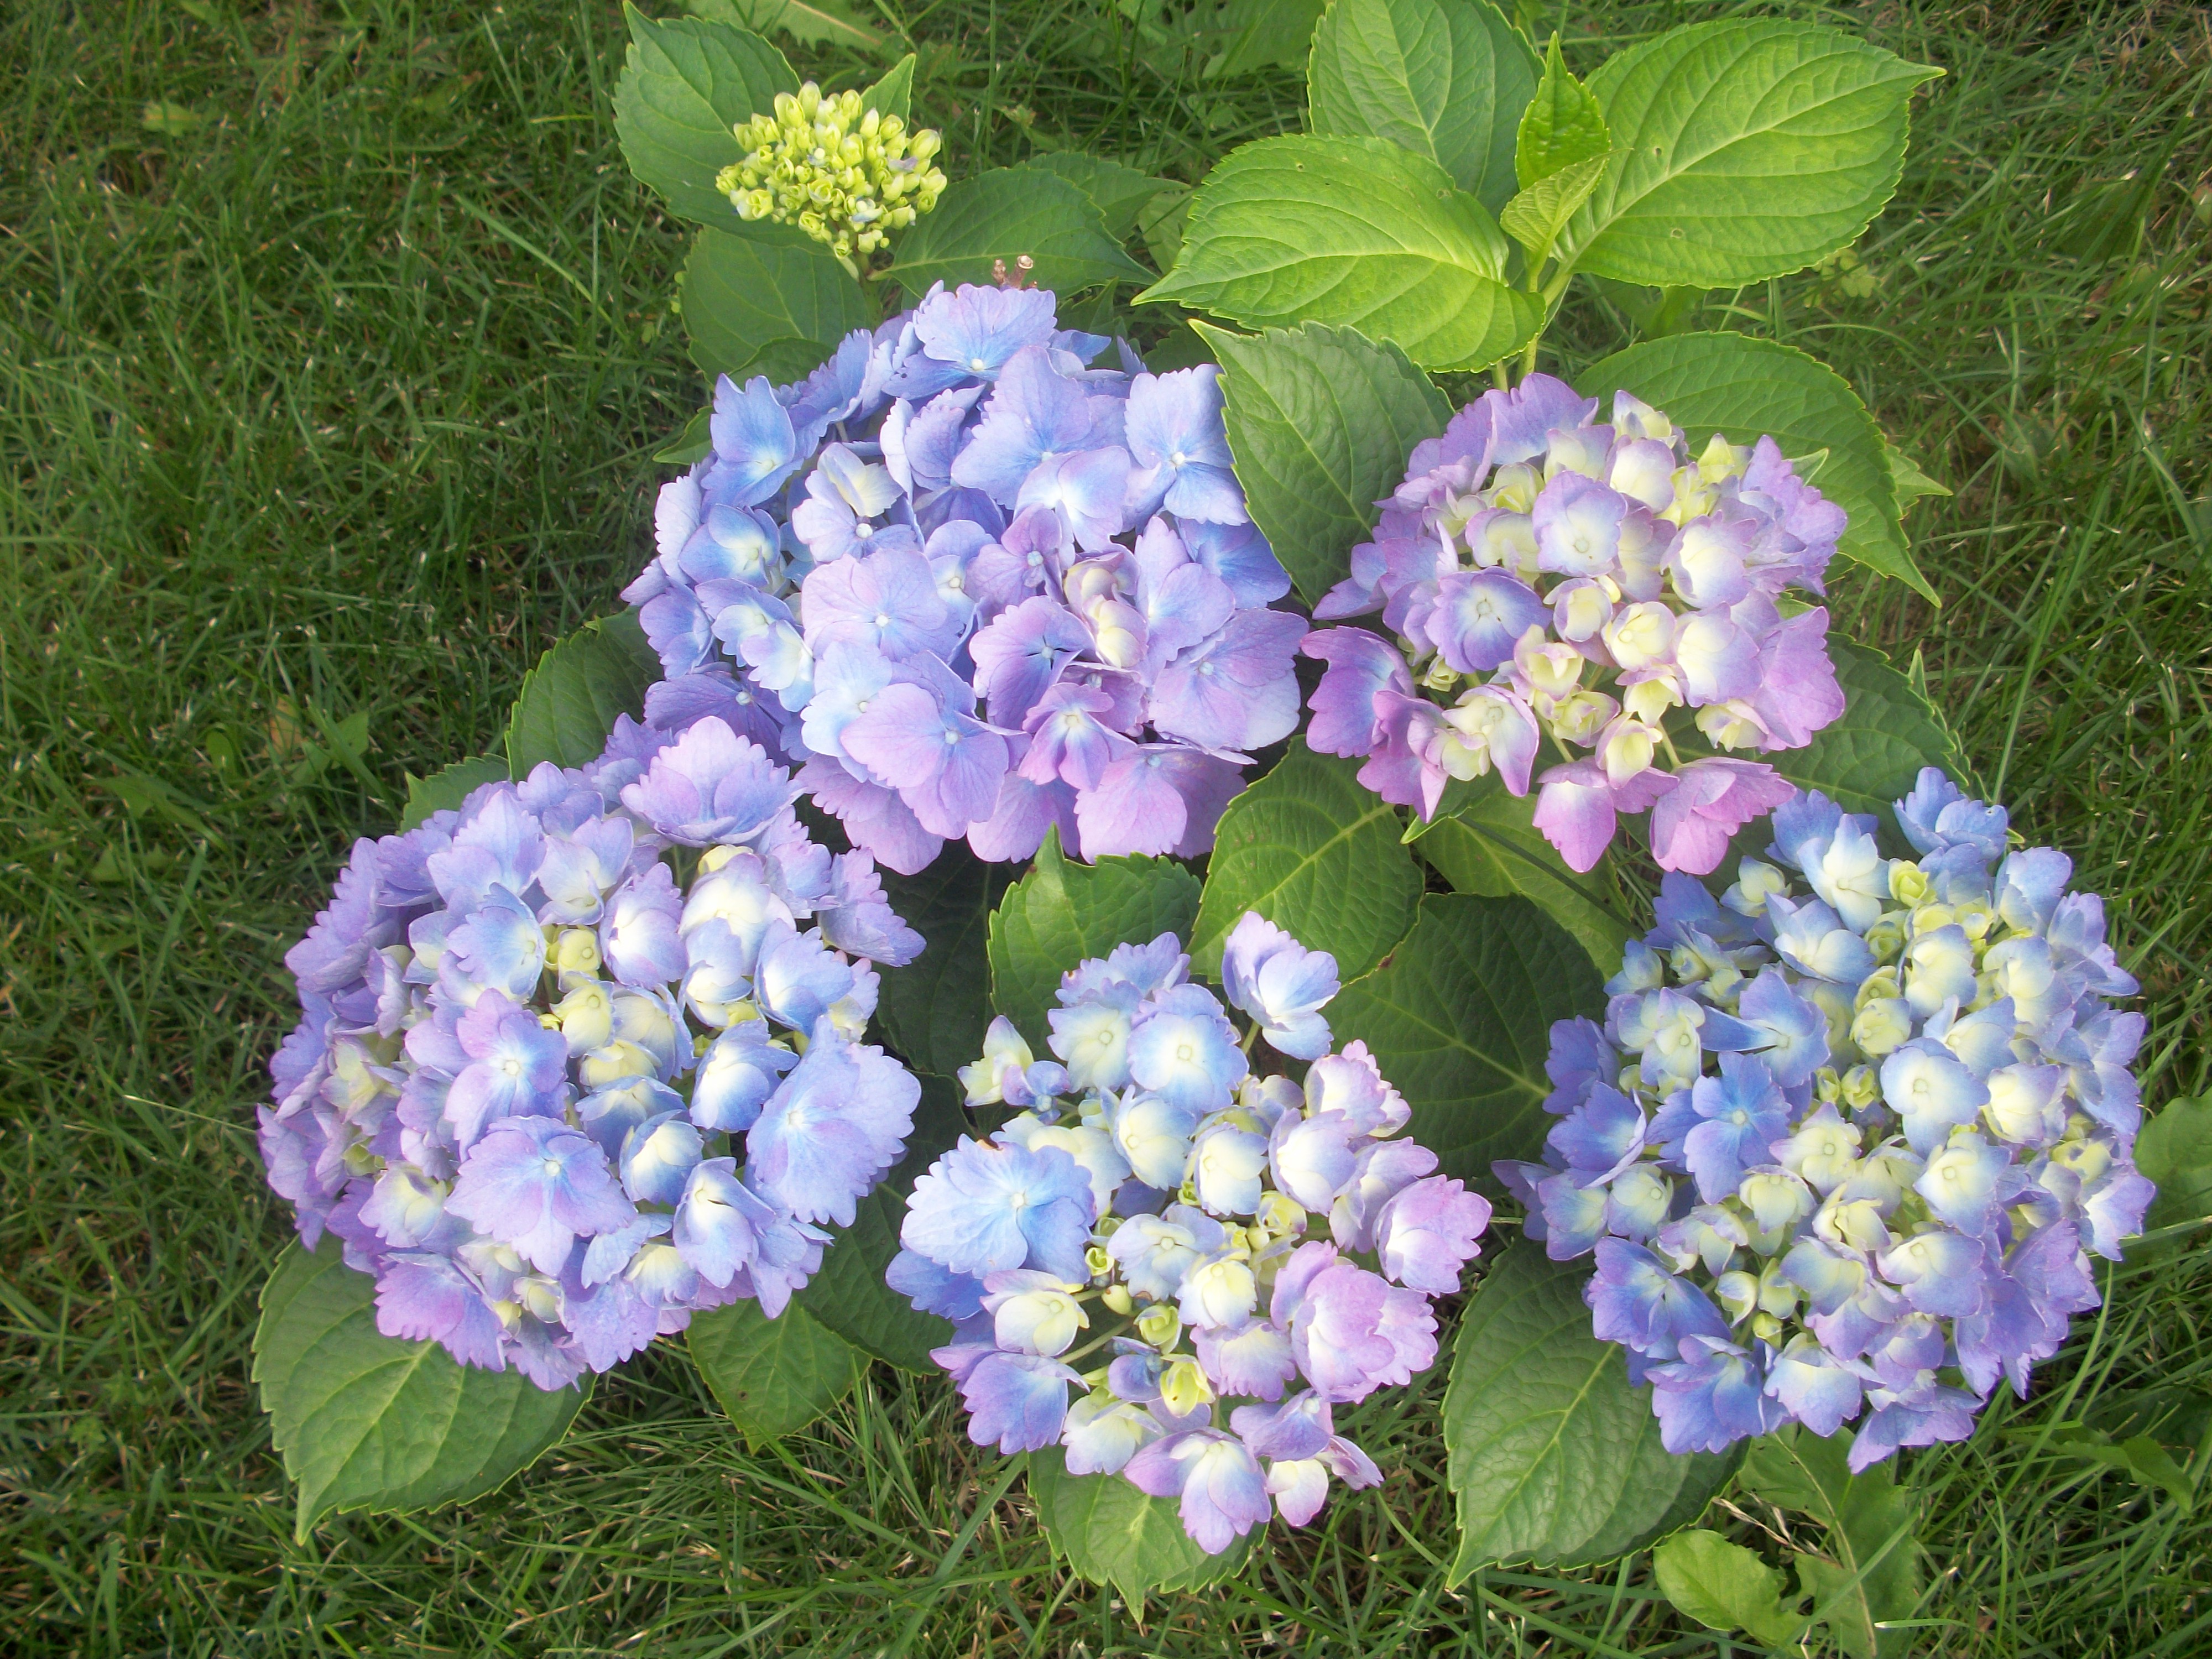 This hydrangea was a gift from work last year. It is small, but made 